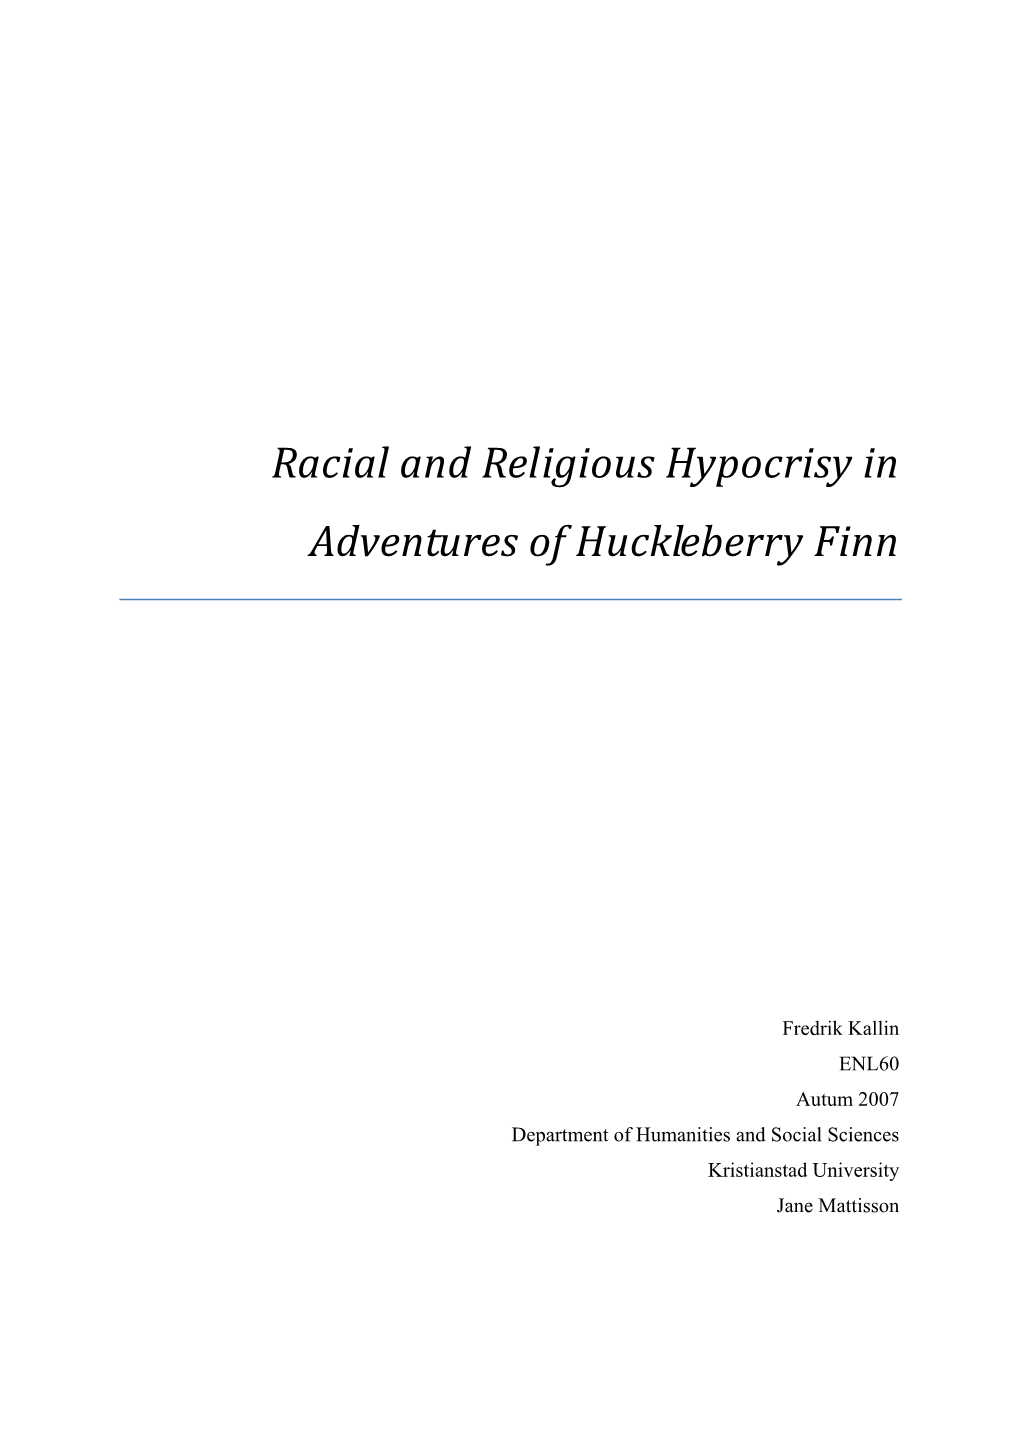 Racial and Religious Hypocrisy in Adventures of Huckleberry Finn